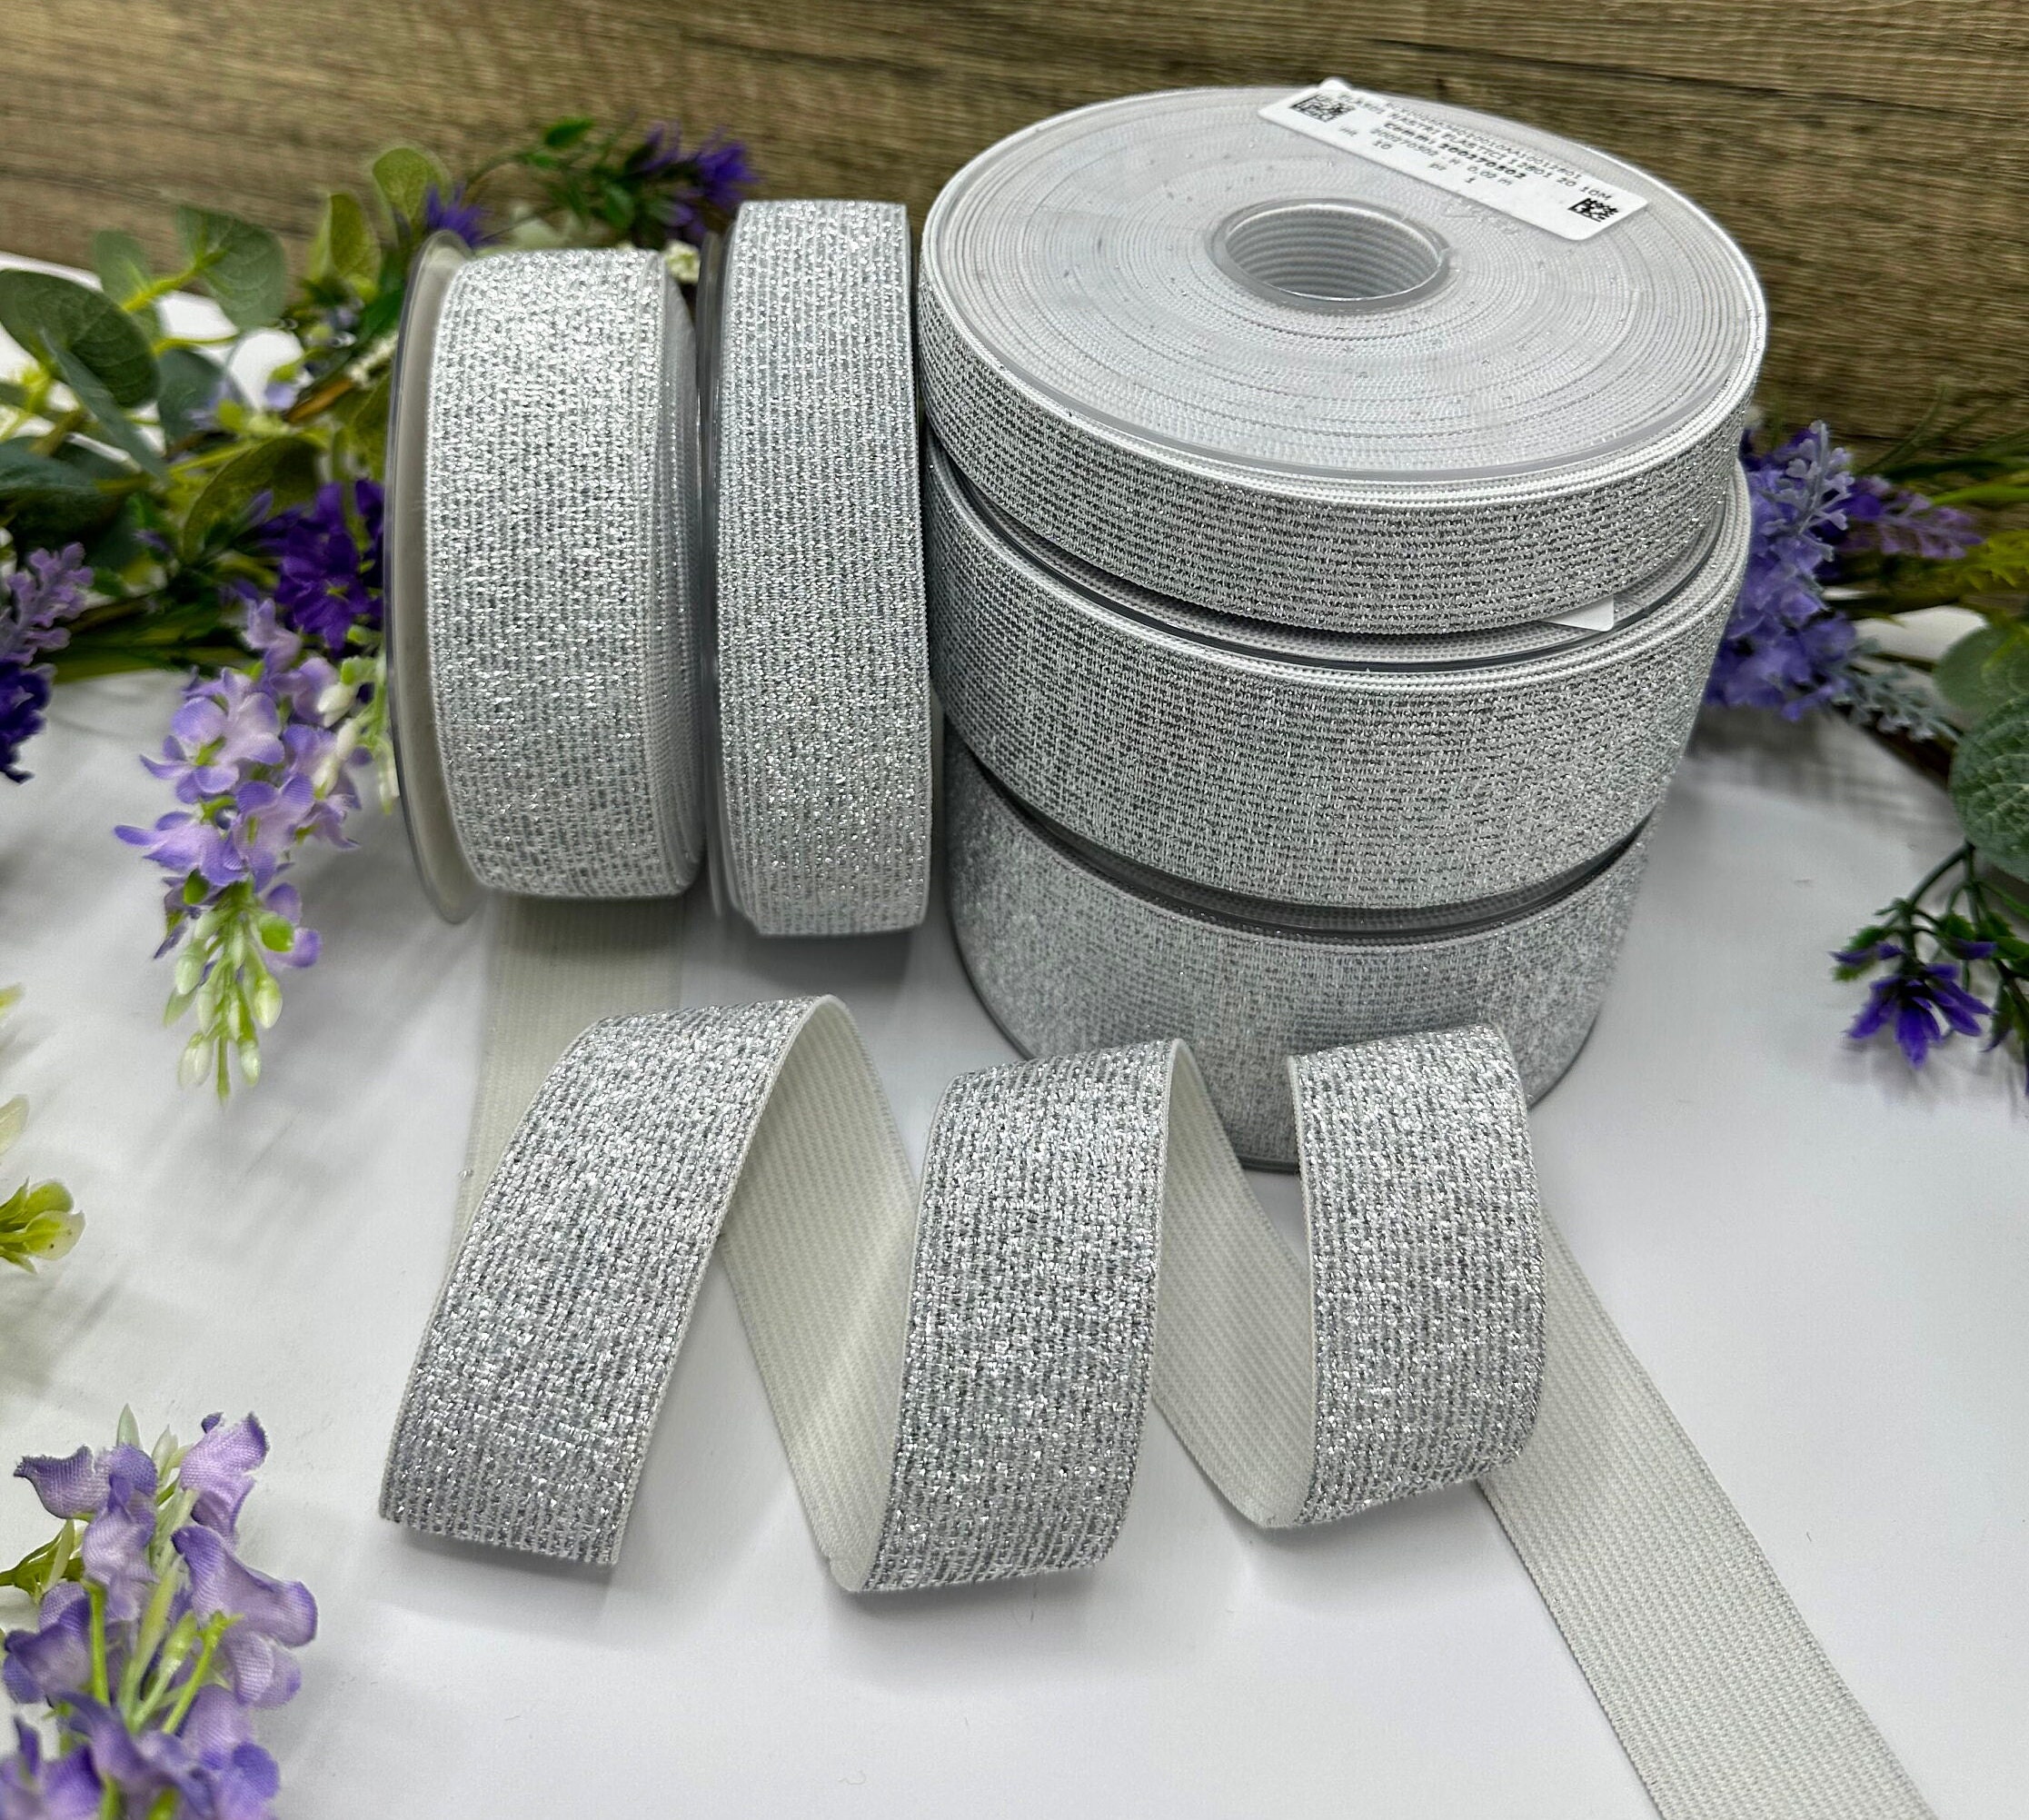  Silver Elastic Band, 15 Yard, 1/4 Inch (6mm), Glitter Metallic Flat  Elastic Strap for Sewing and Crafting : Arts, Crafts & Sewing